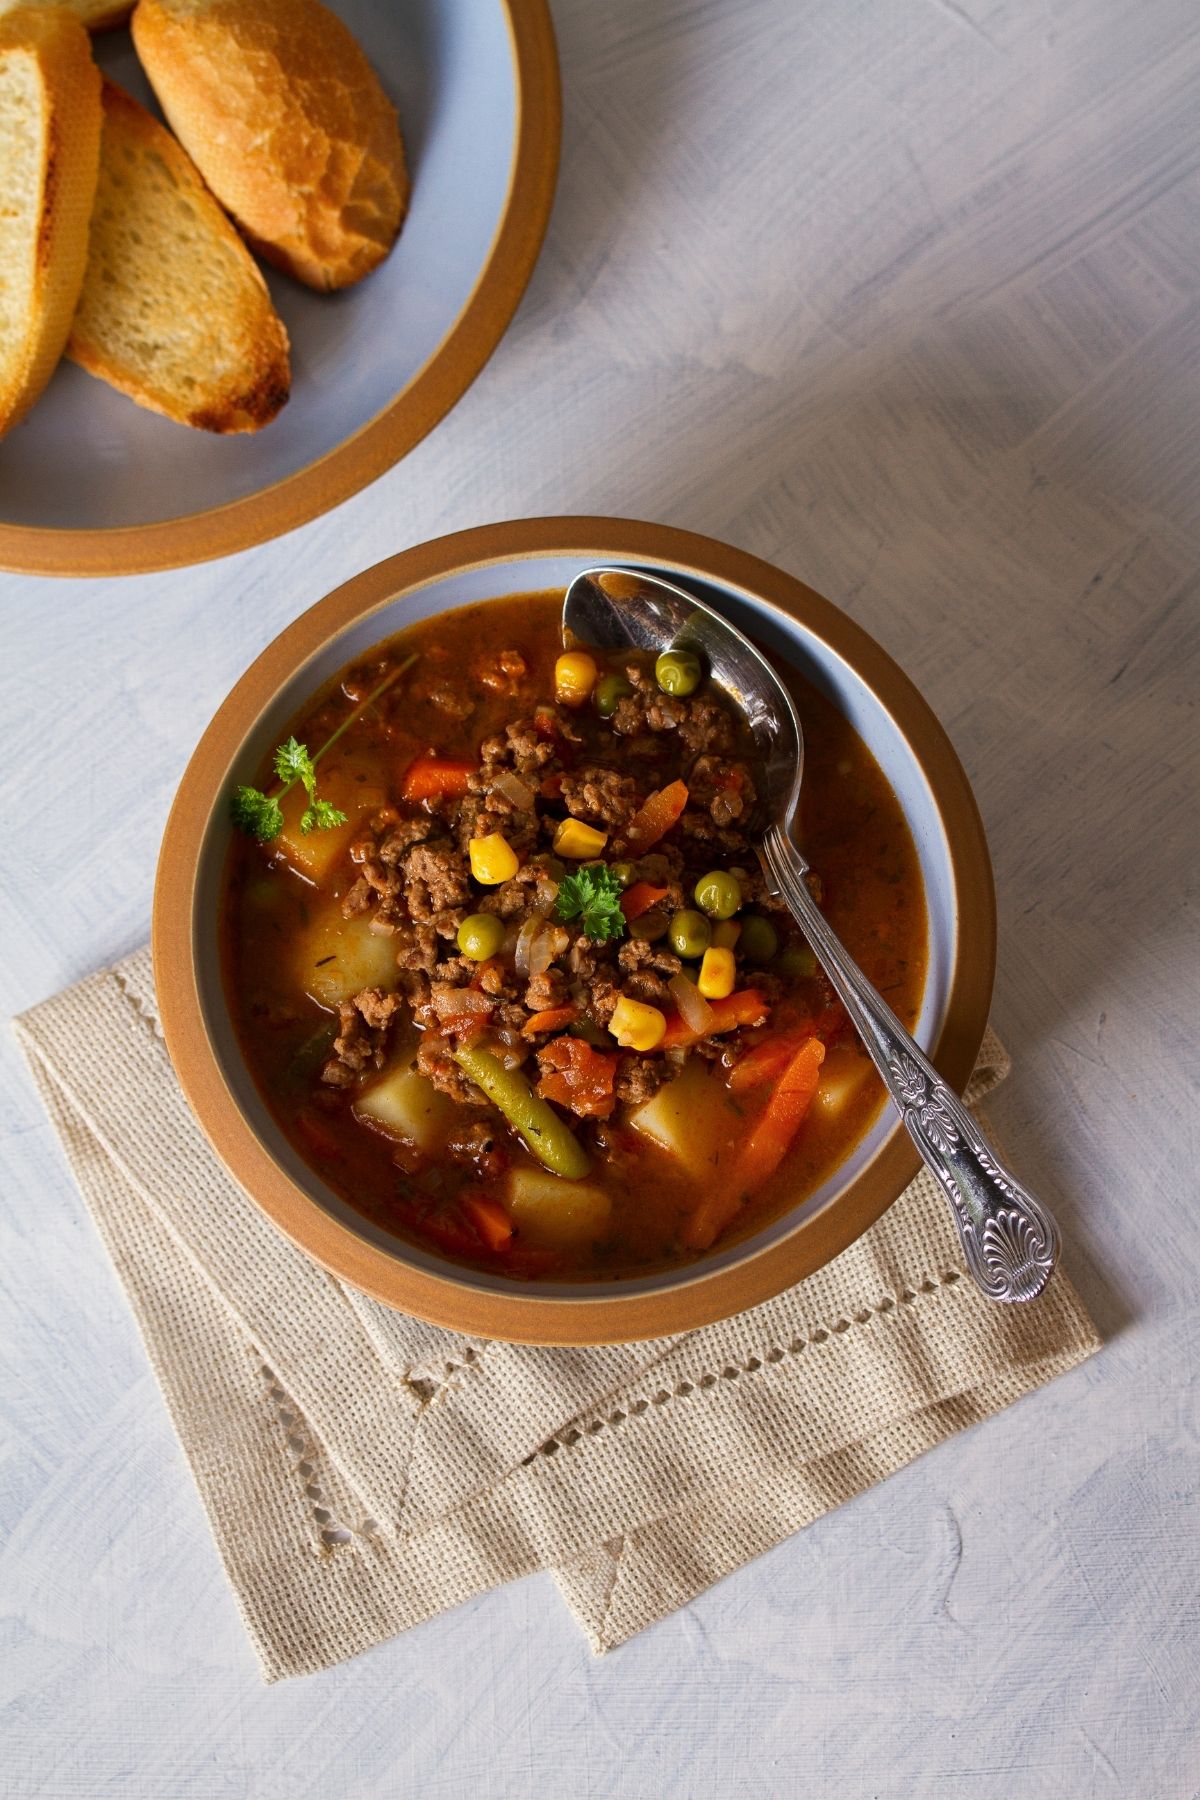 Hamburger vegetable soup with bread